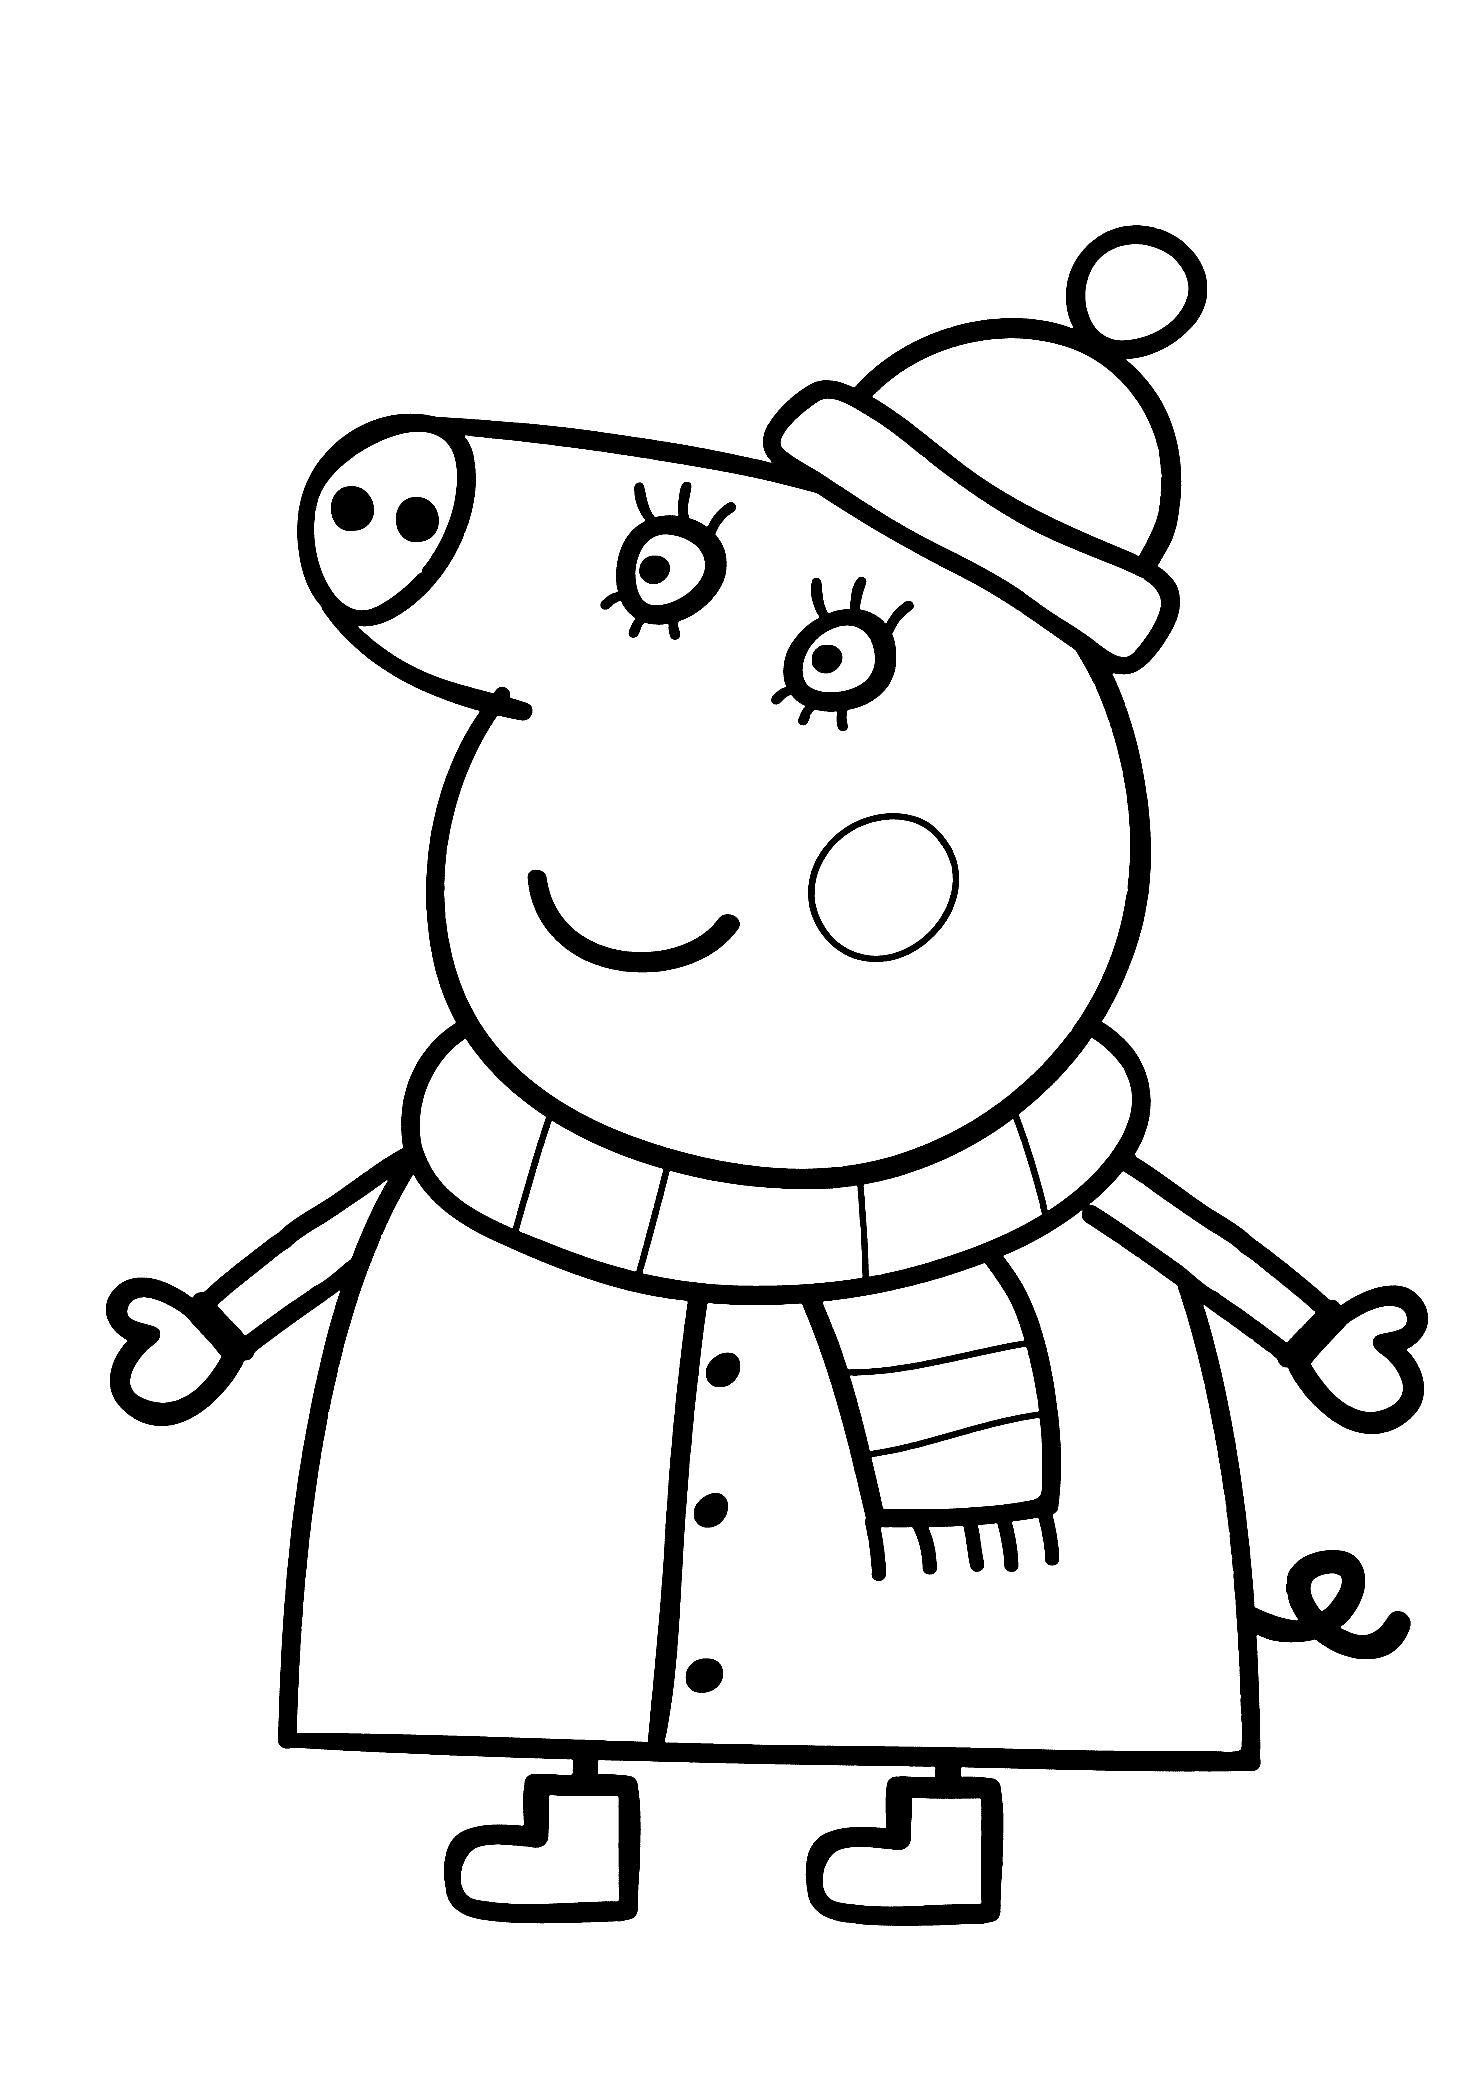 Peppa Pig Free Coloring Book - High Quality Coloring Pages